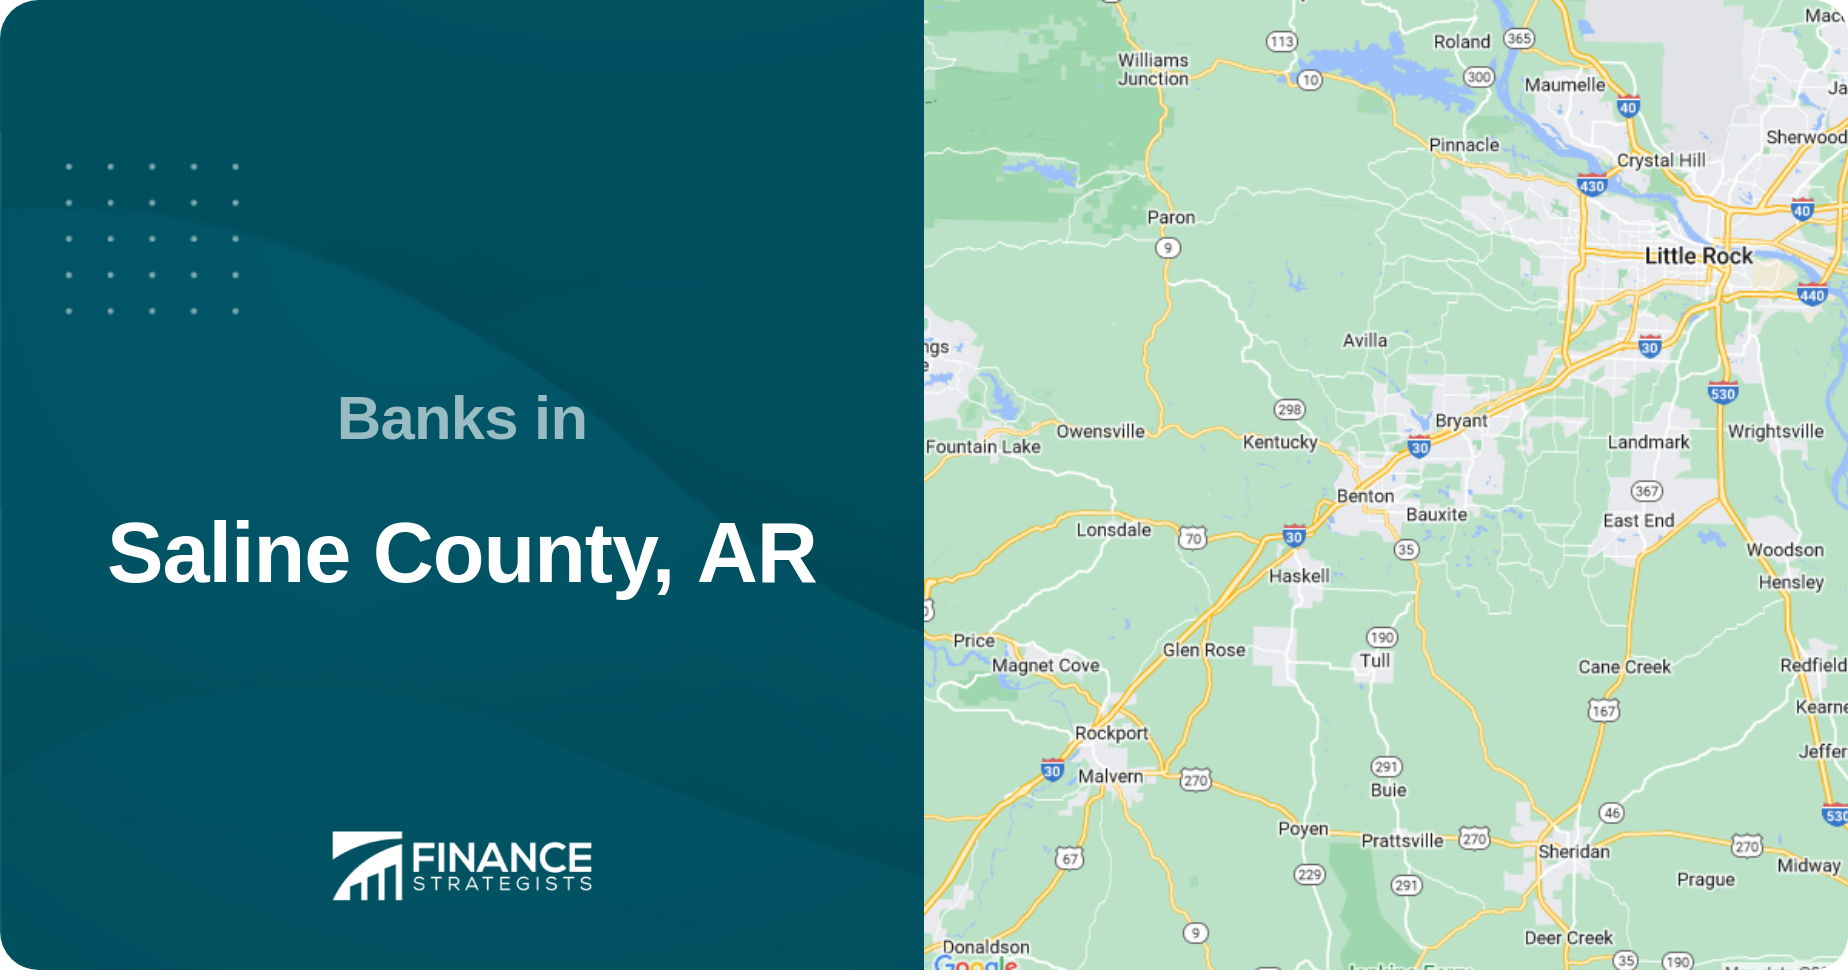 Banks in Saline County, AR